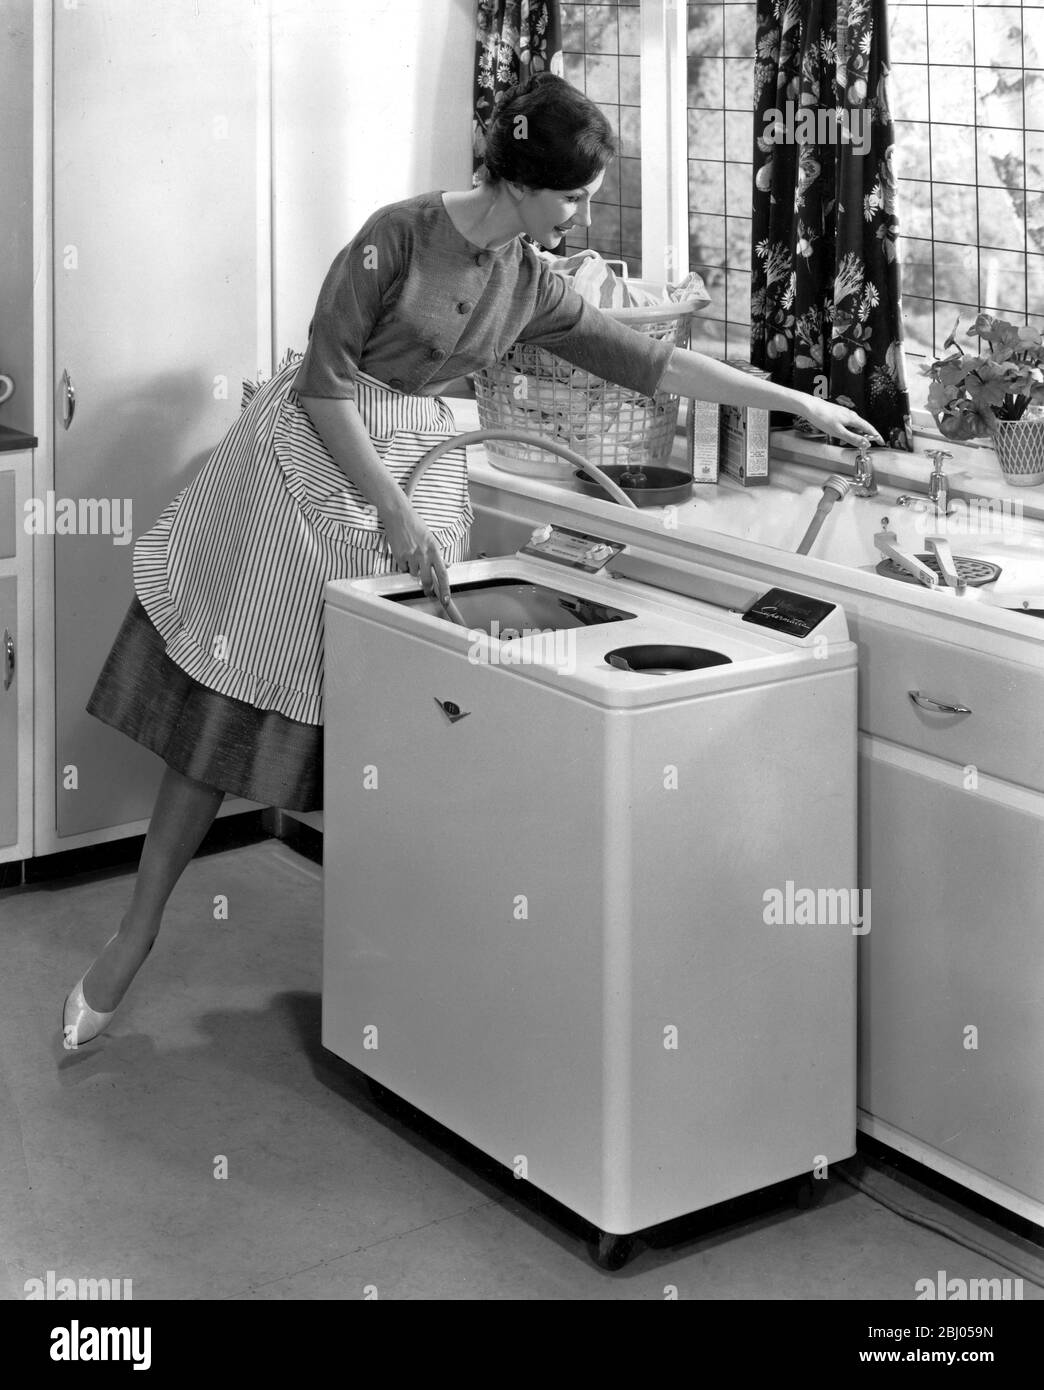 Washing machine Twin Tub on castors which can be moved around the kitchen 1961 Stock Photo